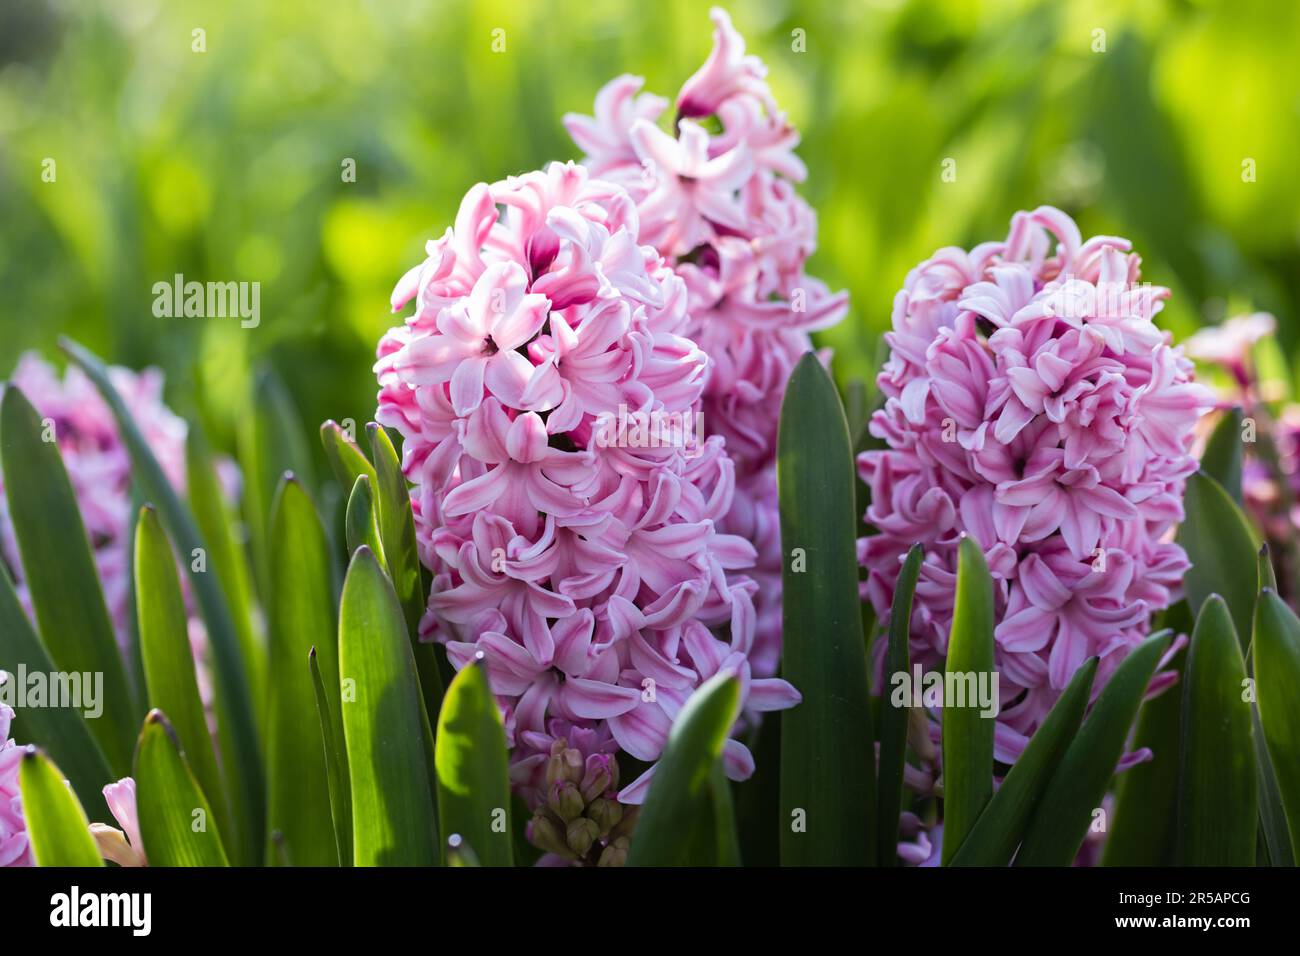 Pink cultivar hyacinth flowers grow in the garden on a sunny day, close-up photo with selective soft focus Stock Photo